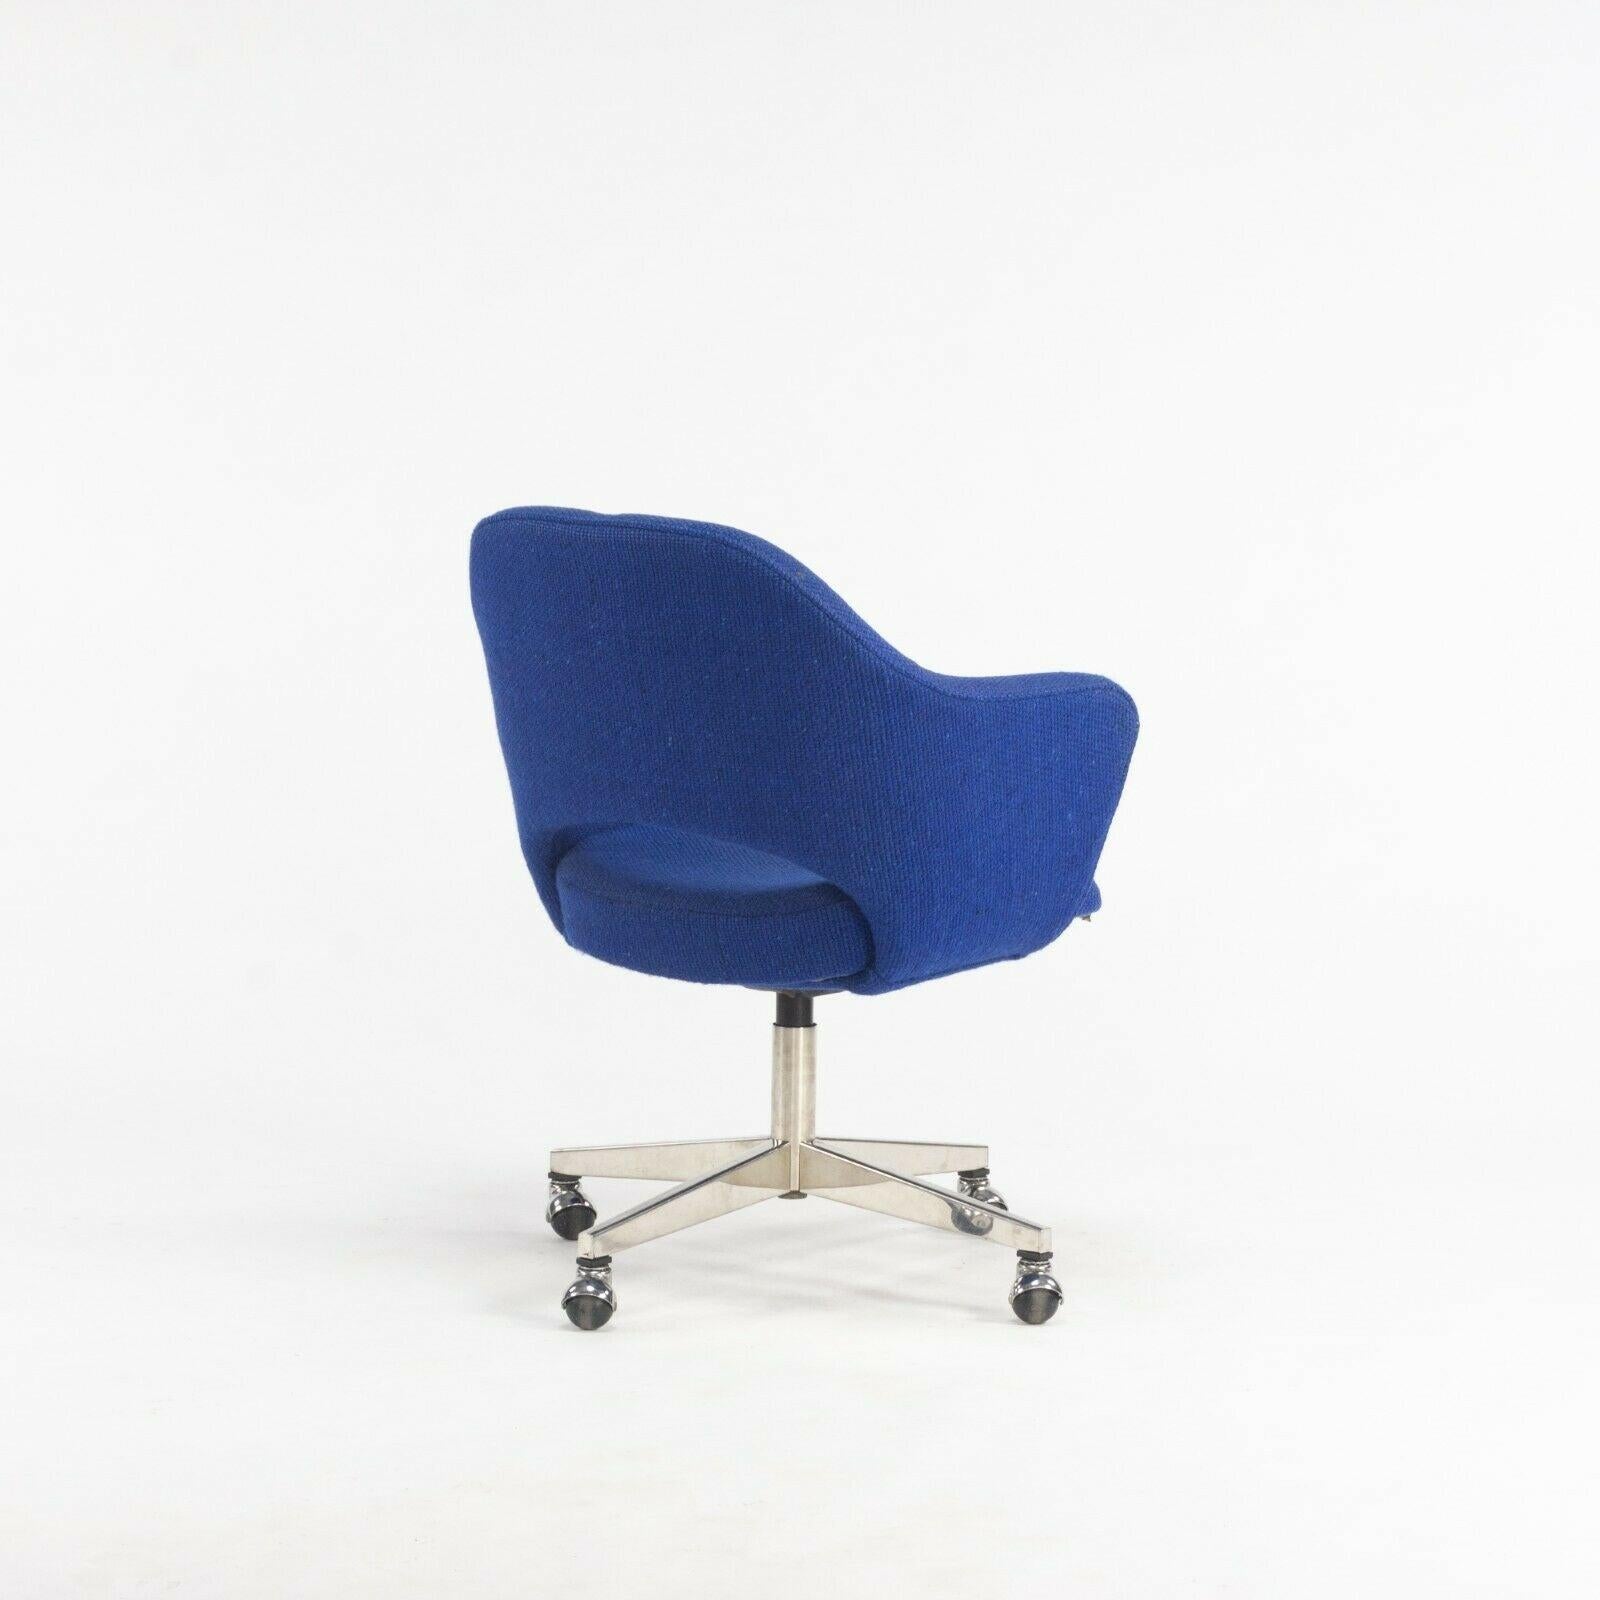 American 1974 Eero Saarinen for Knoll Rolling Executive Office Chair Original Blue Fabric For Sale